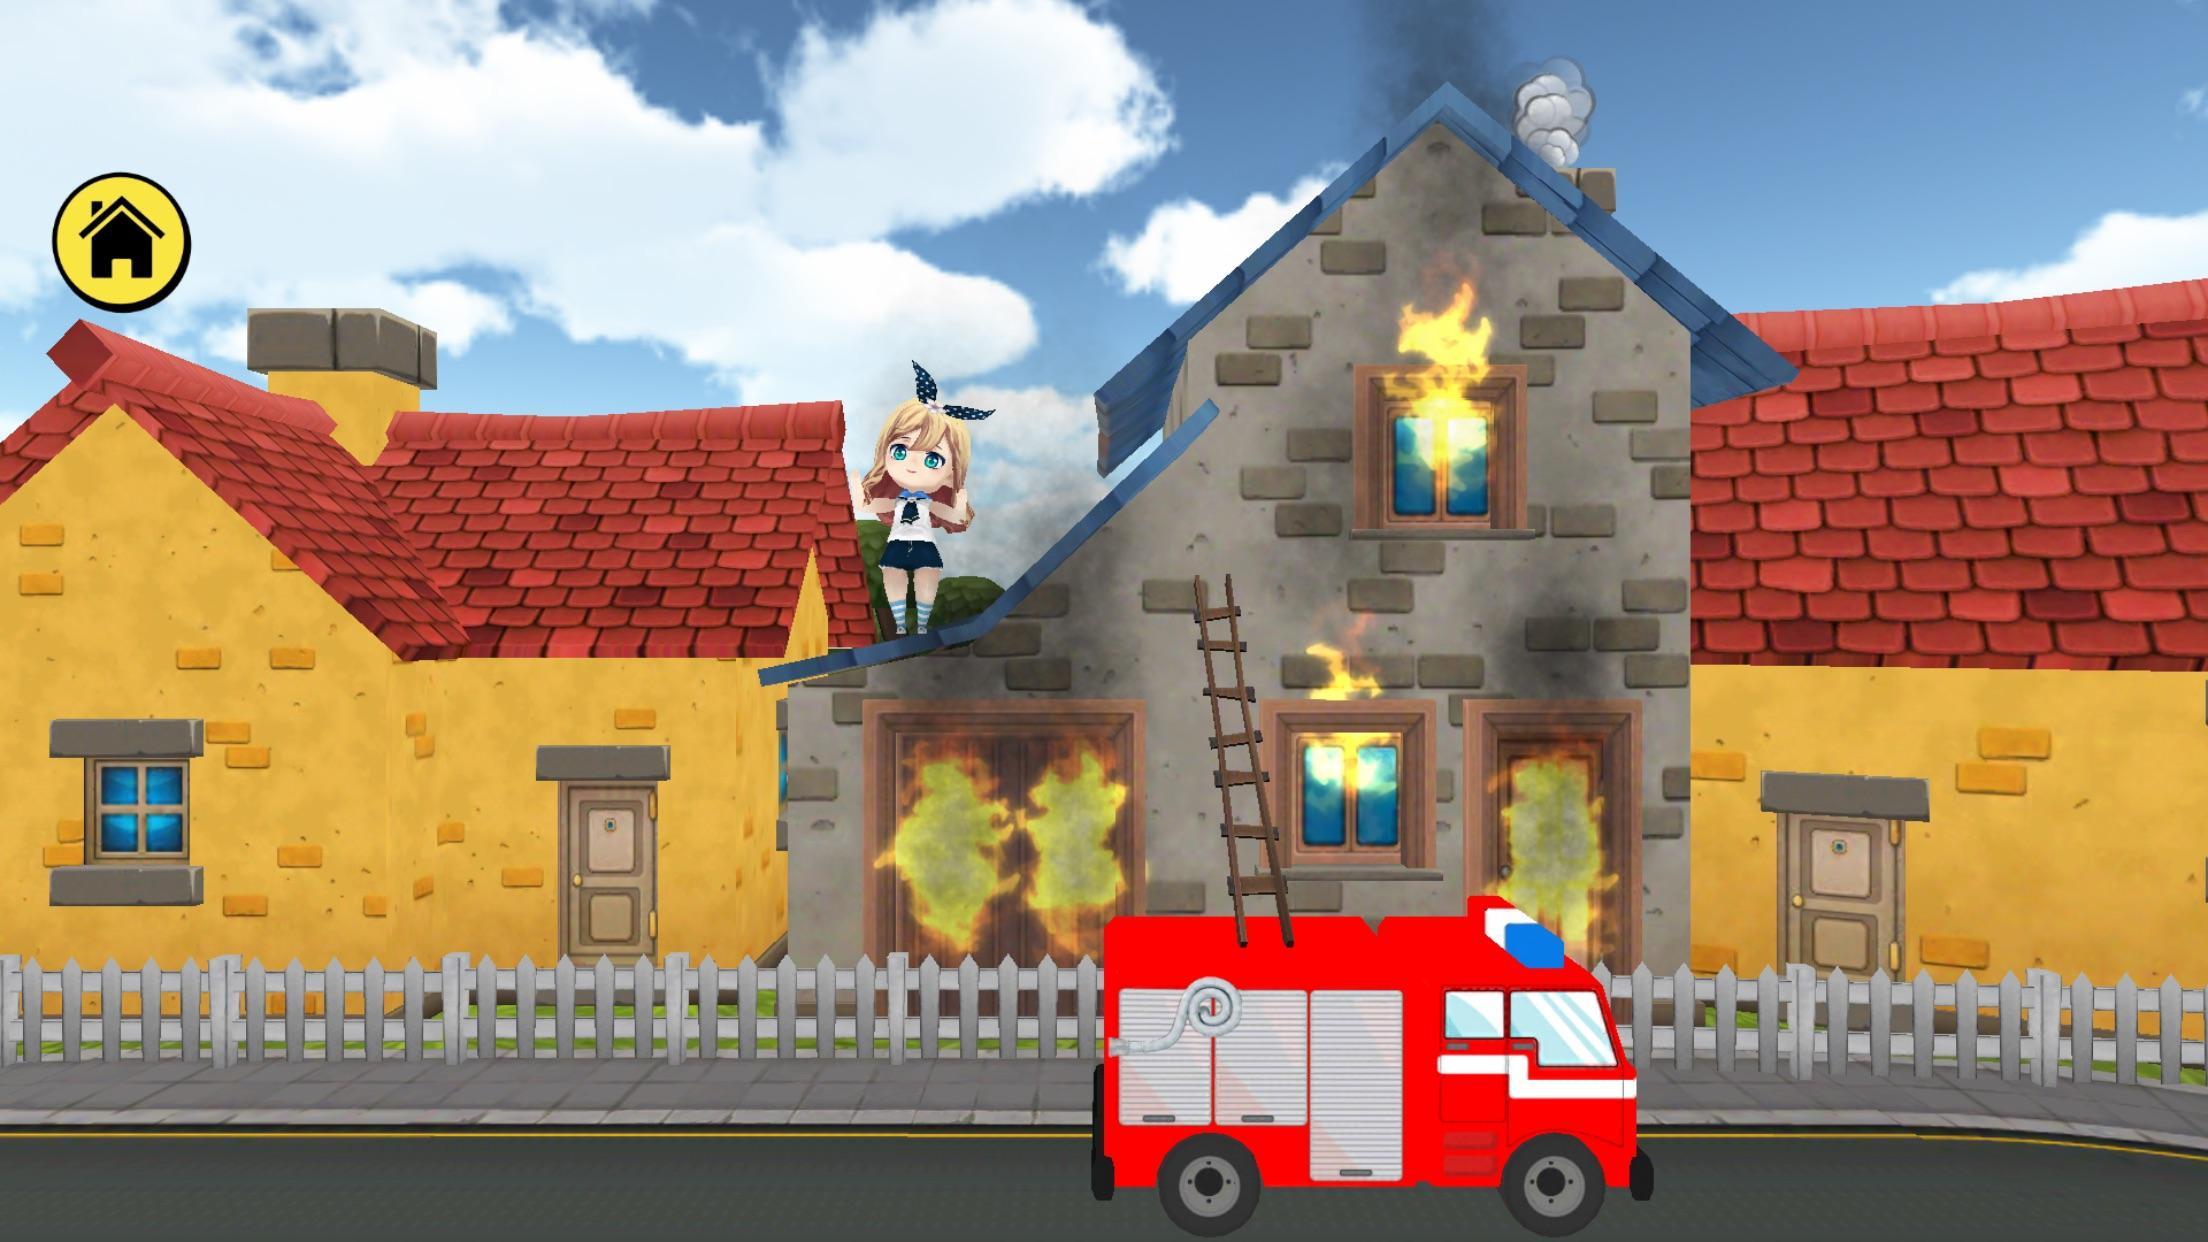 Kidlo Fire Fighter - Free 3D Rescue Game For Kids 1.8 Screenshot 13